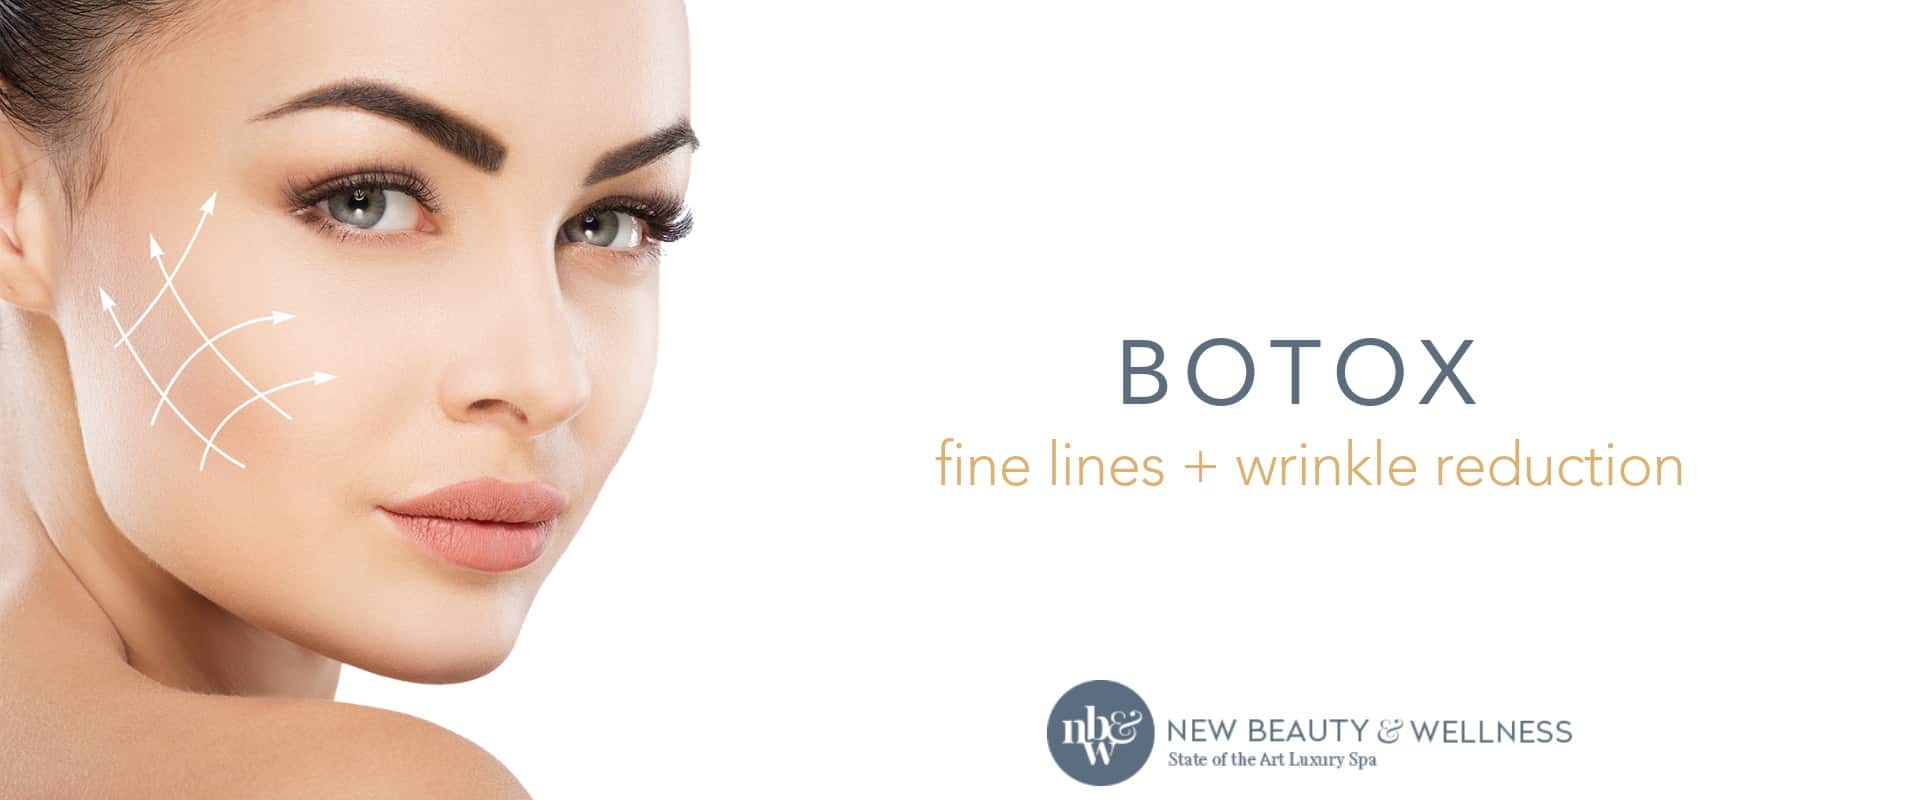 Woman with smooth skin with a graphic demonstrating the accentuation botox can add to the face.